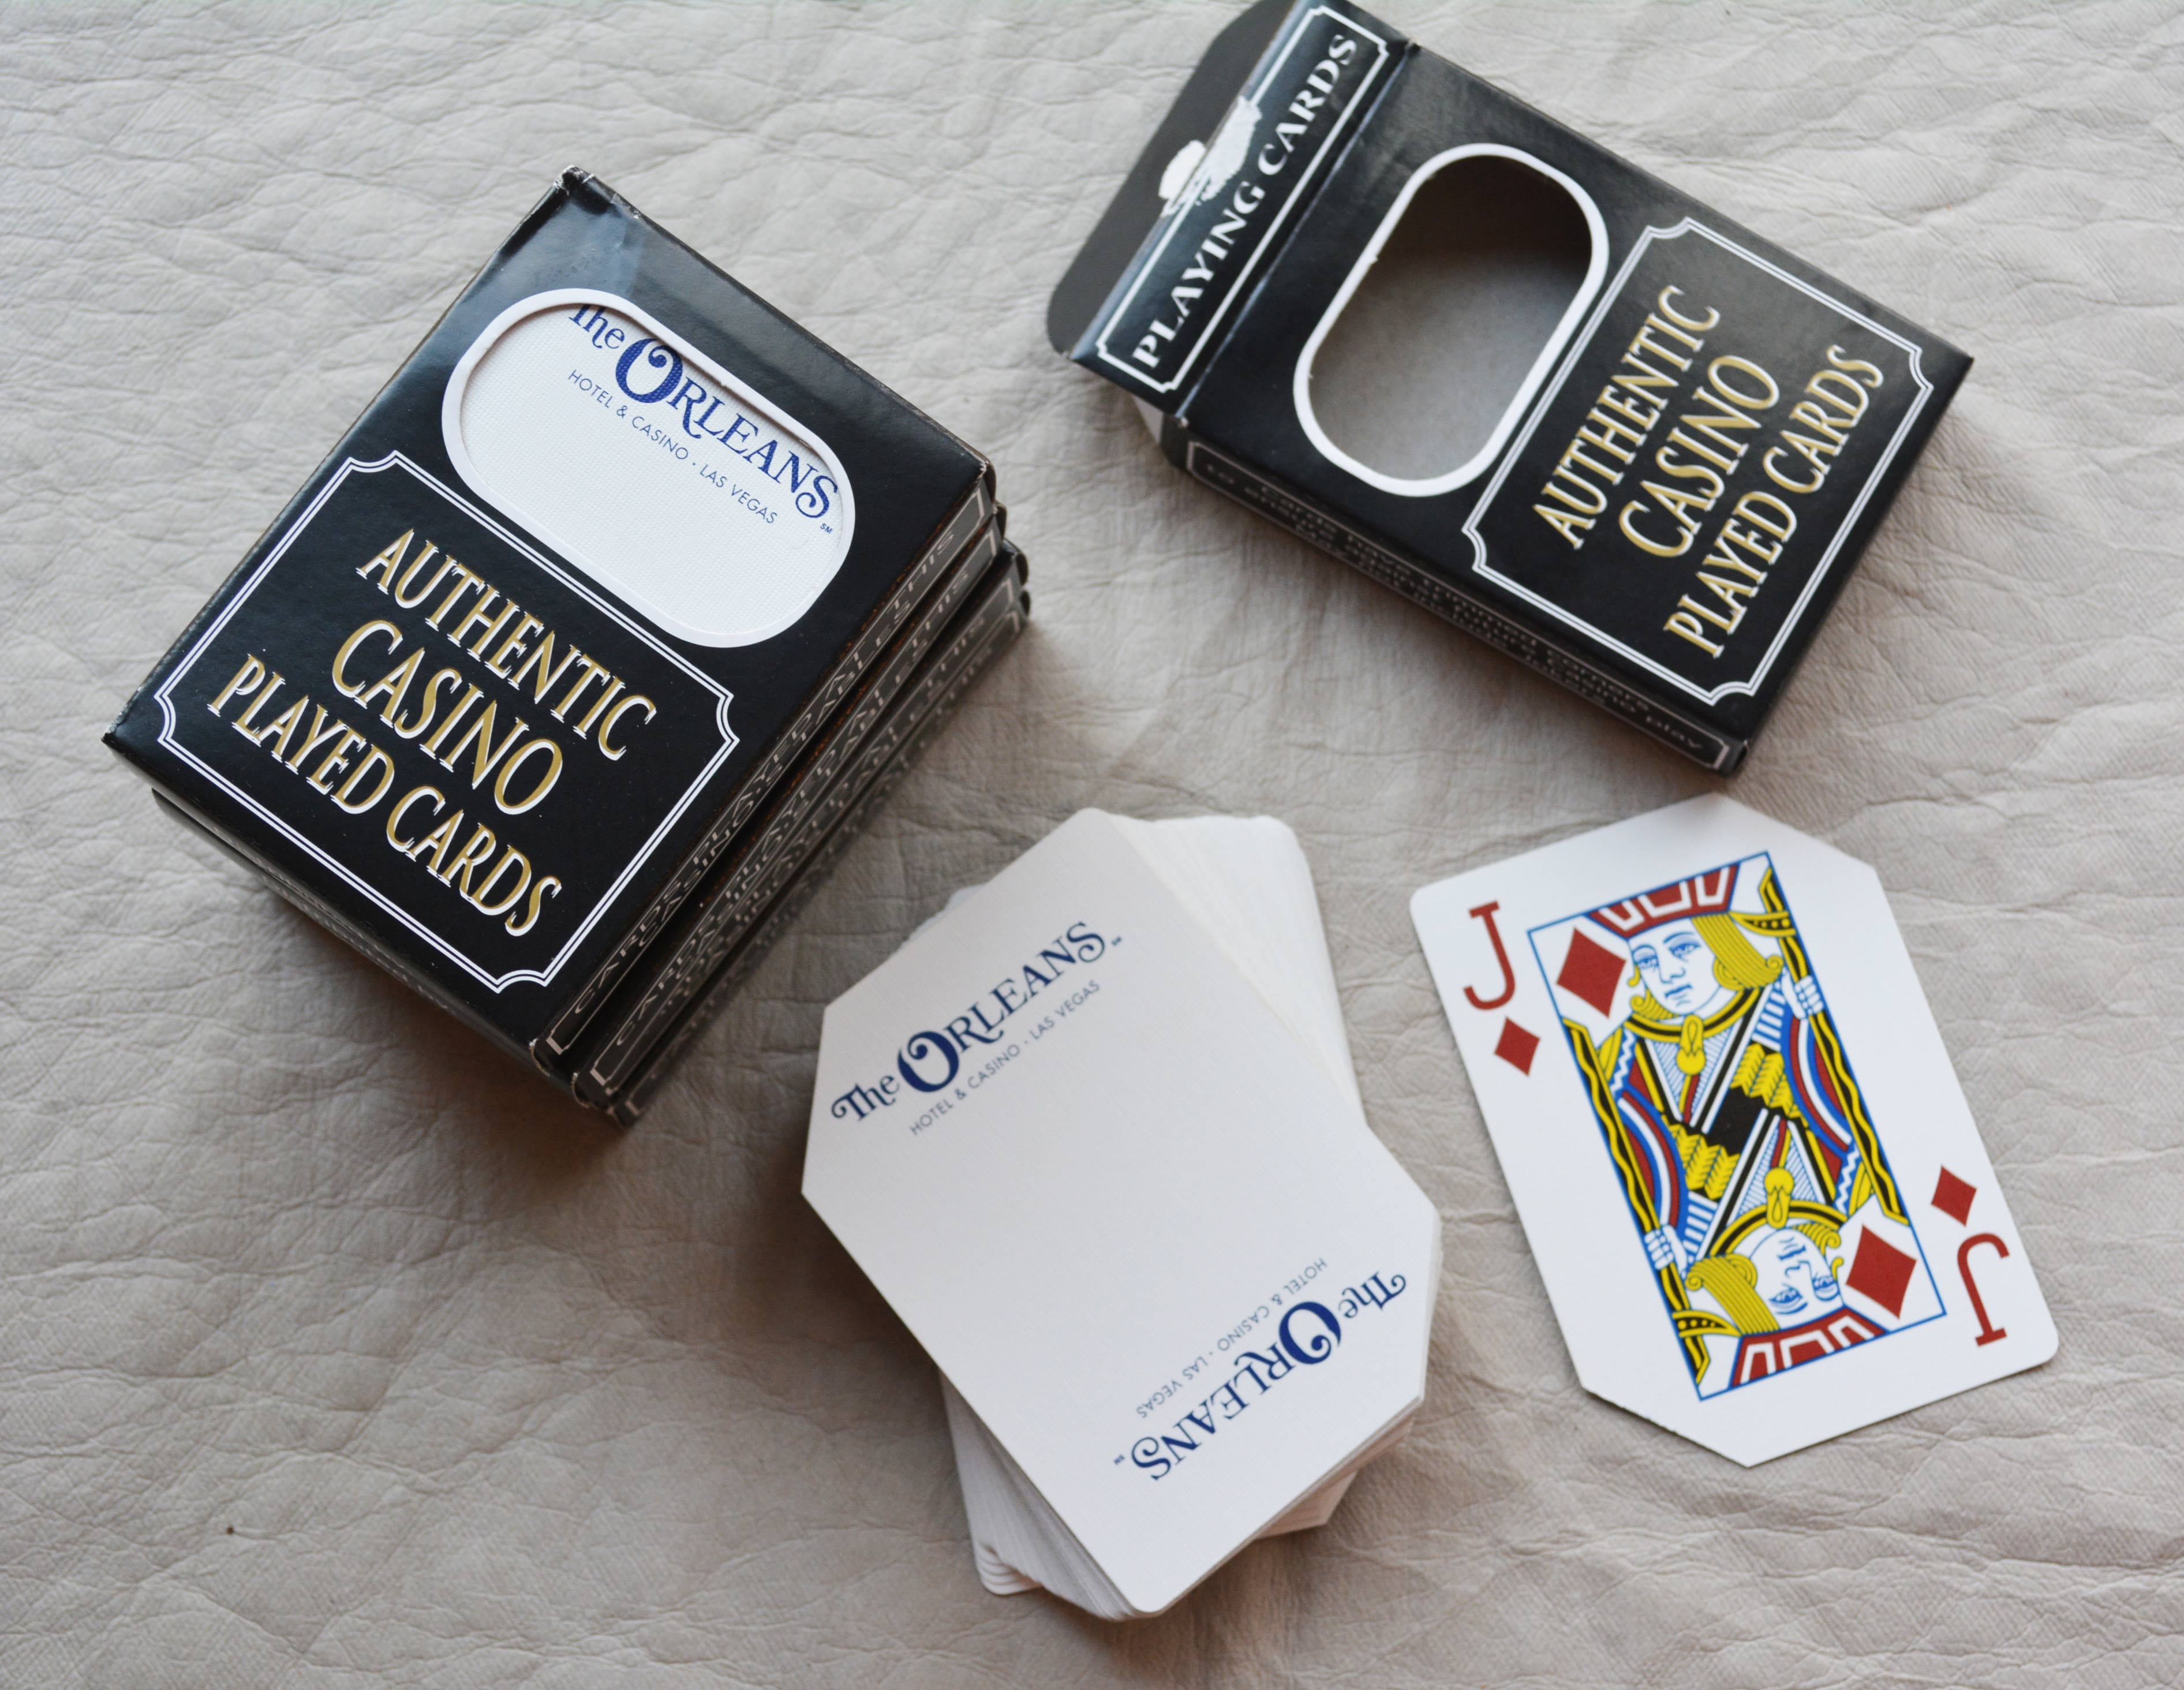 The Orleans Las Vegas Casino Playing Cards